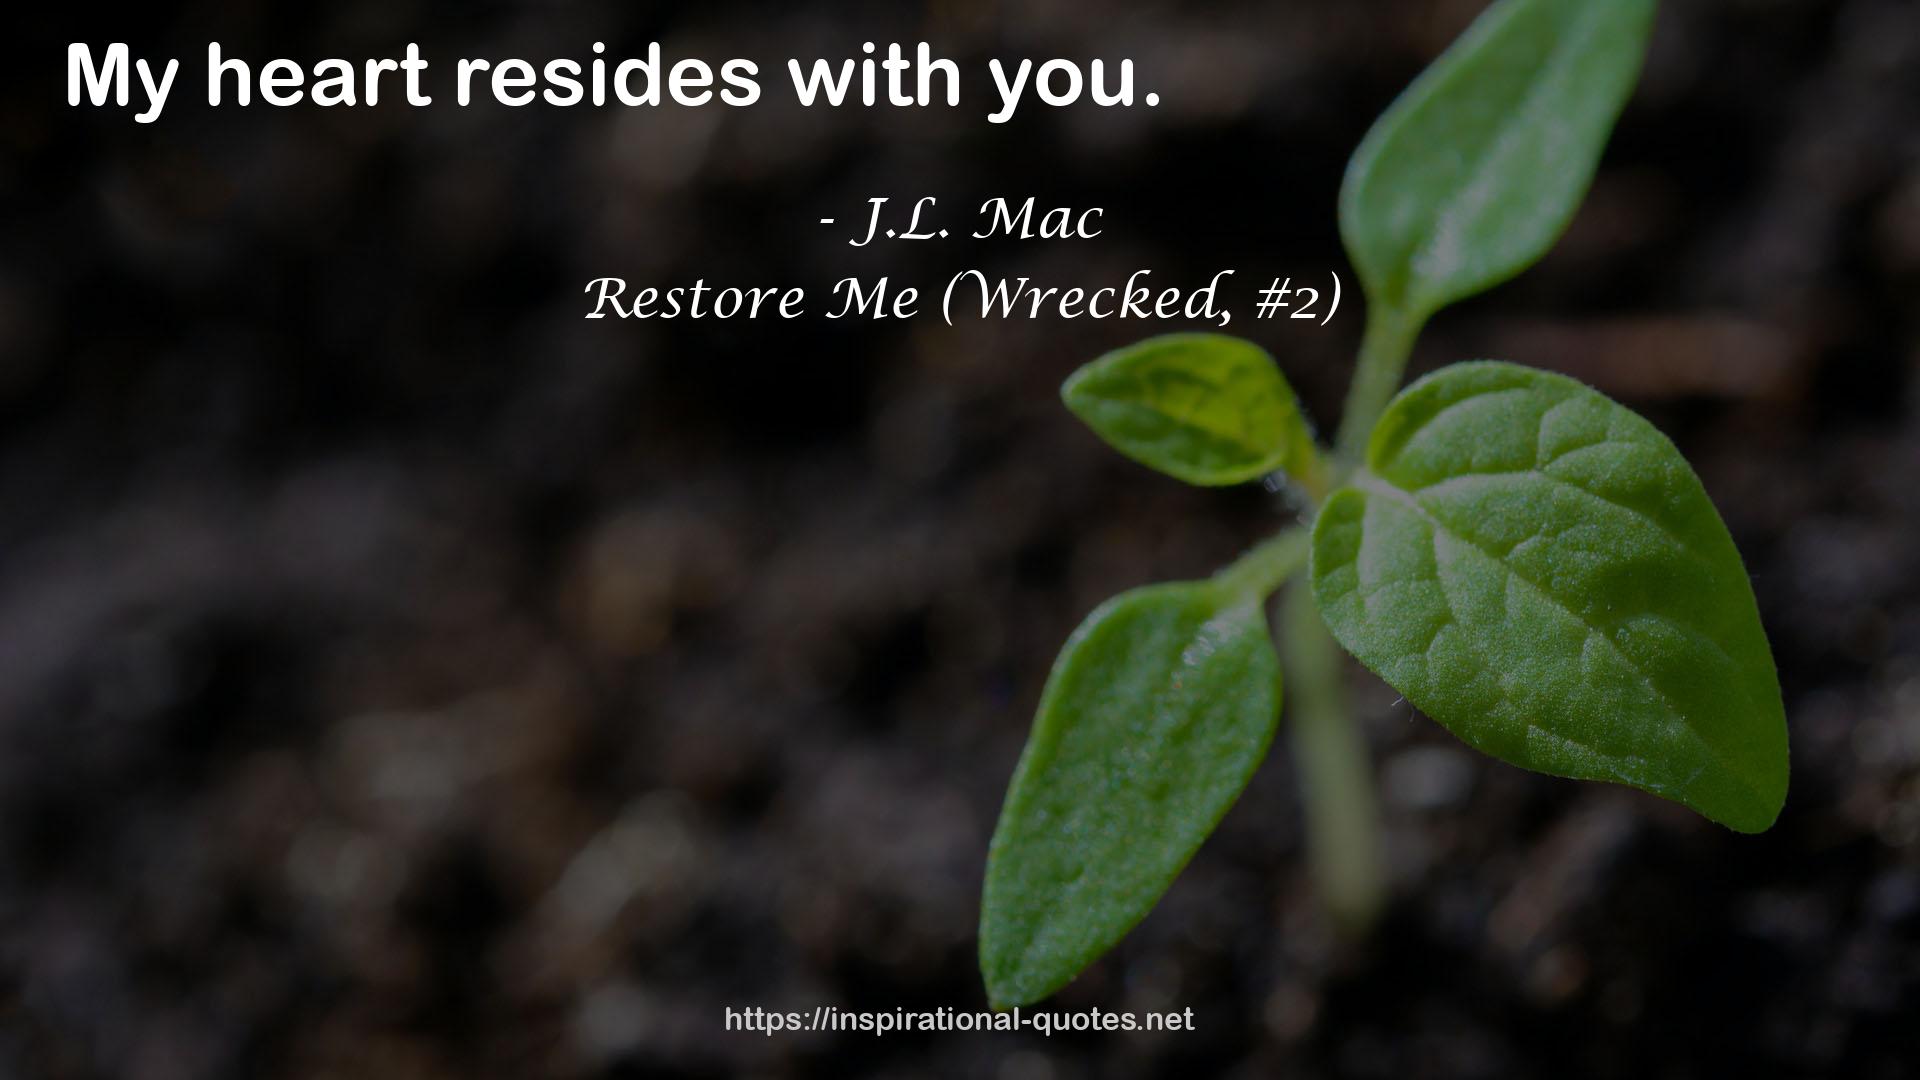 Restore Me (Wrecked, #2) QUOTES